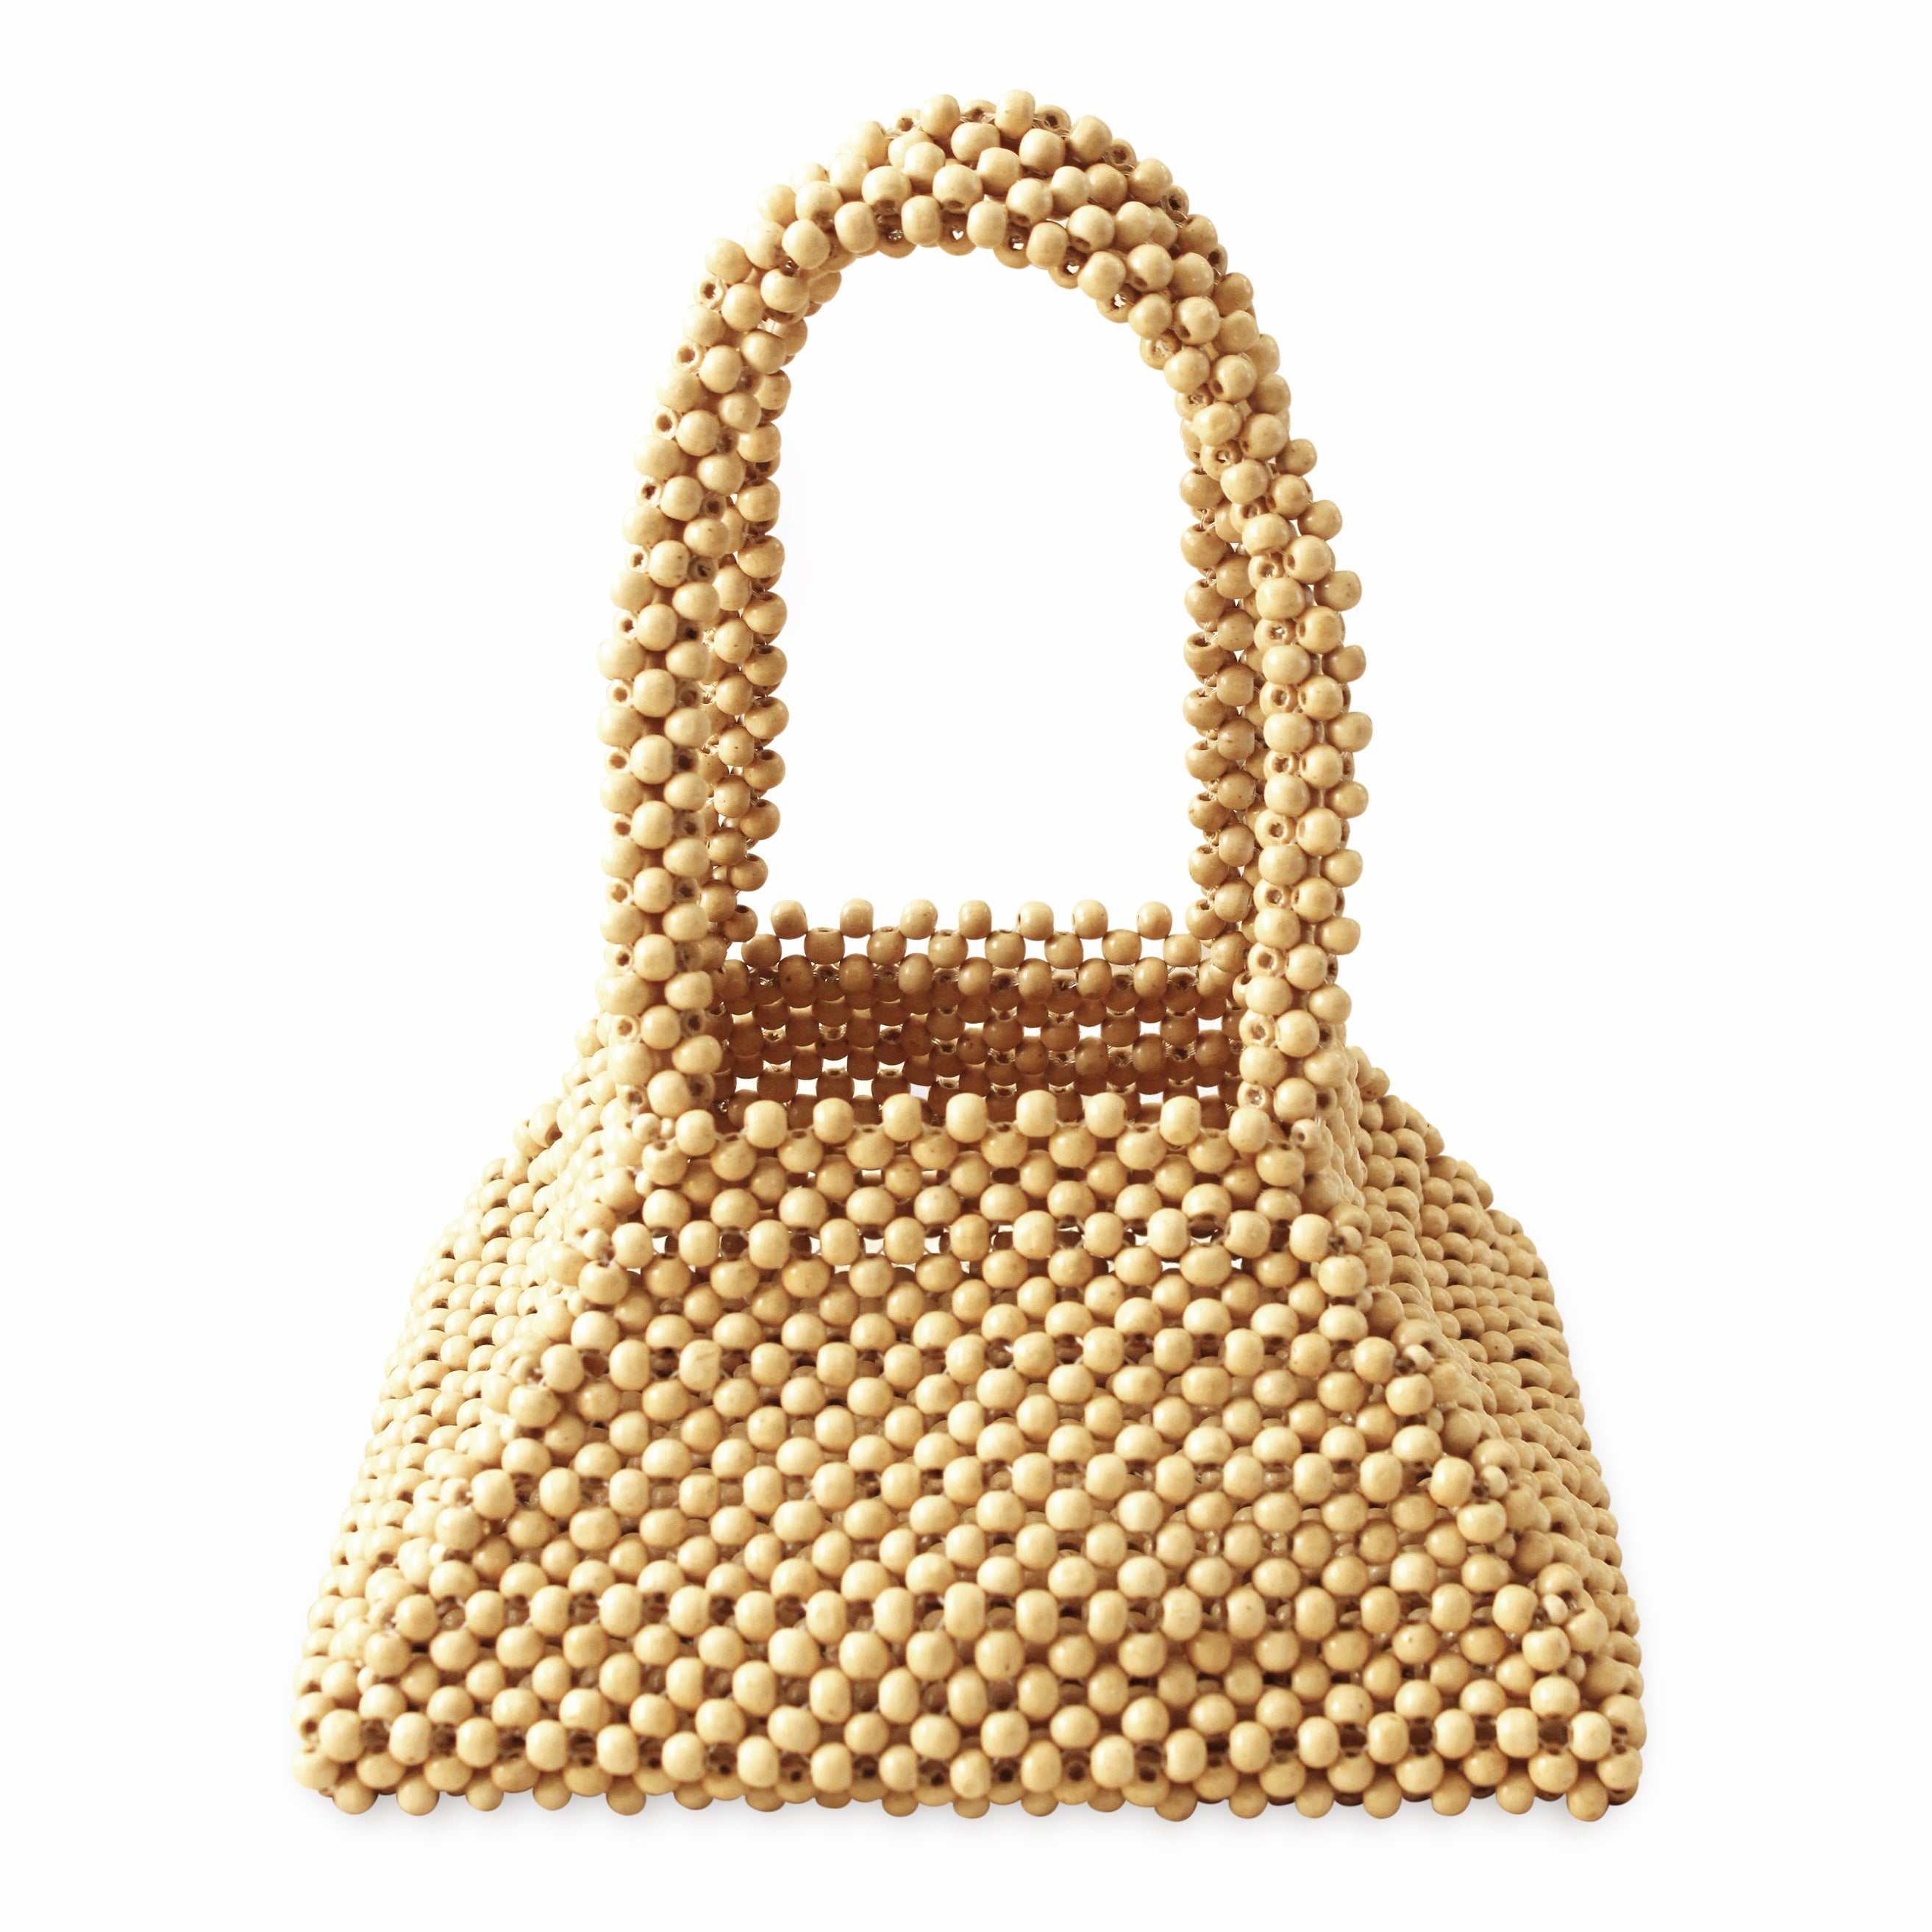 Pyramid Beaded Tote Bag in Nude Beige - Handmade, Eco-friendly and Fair Trade